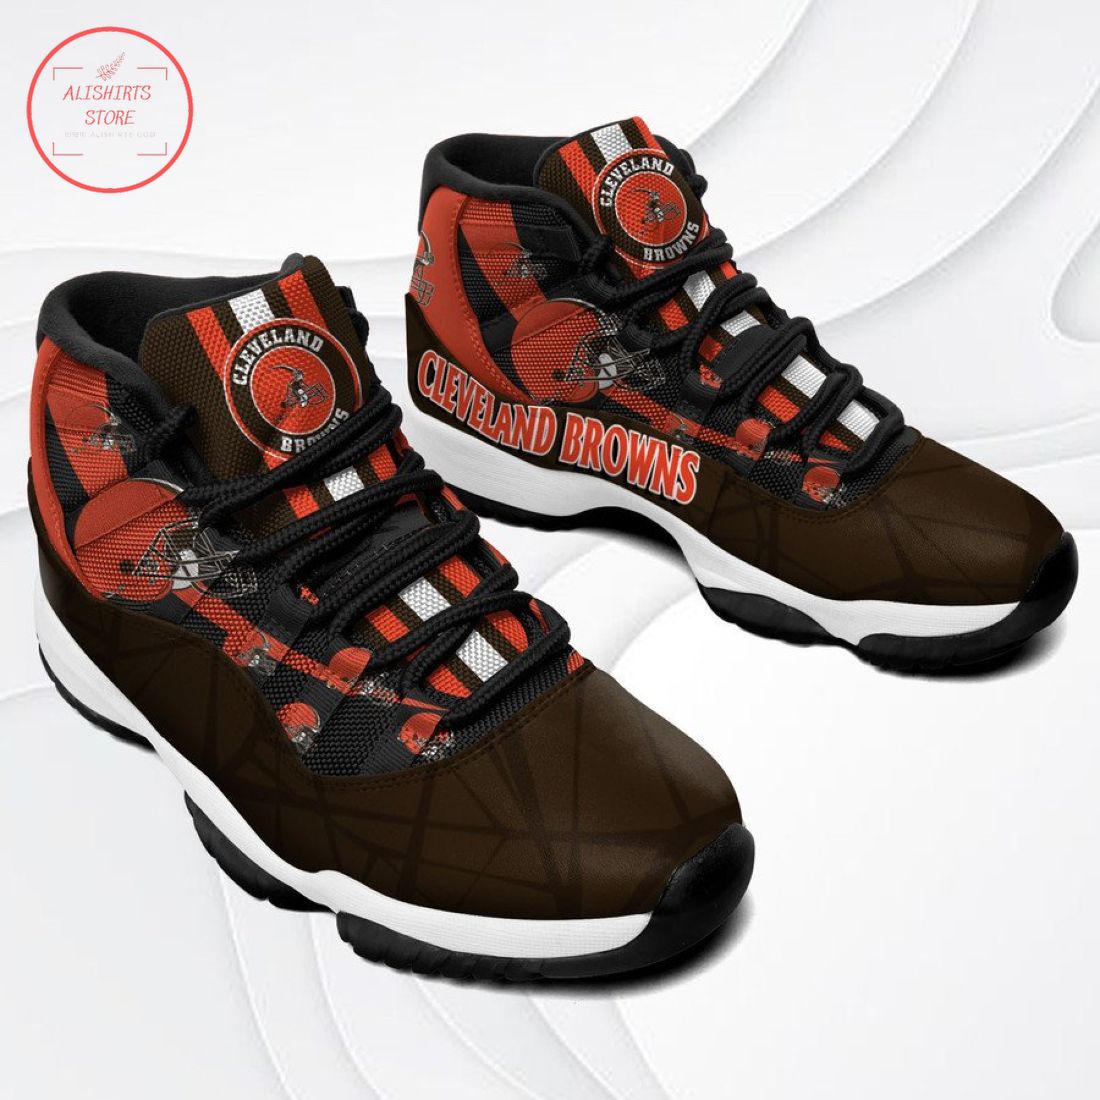 NFL Cleveland Browns New Air Jordan 11 Sneakers Shoes